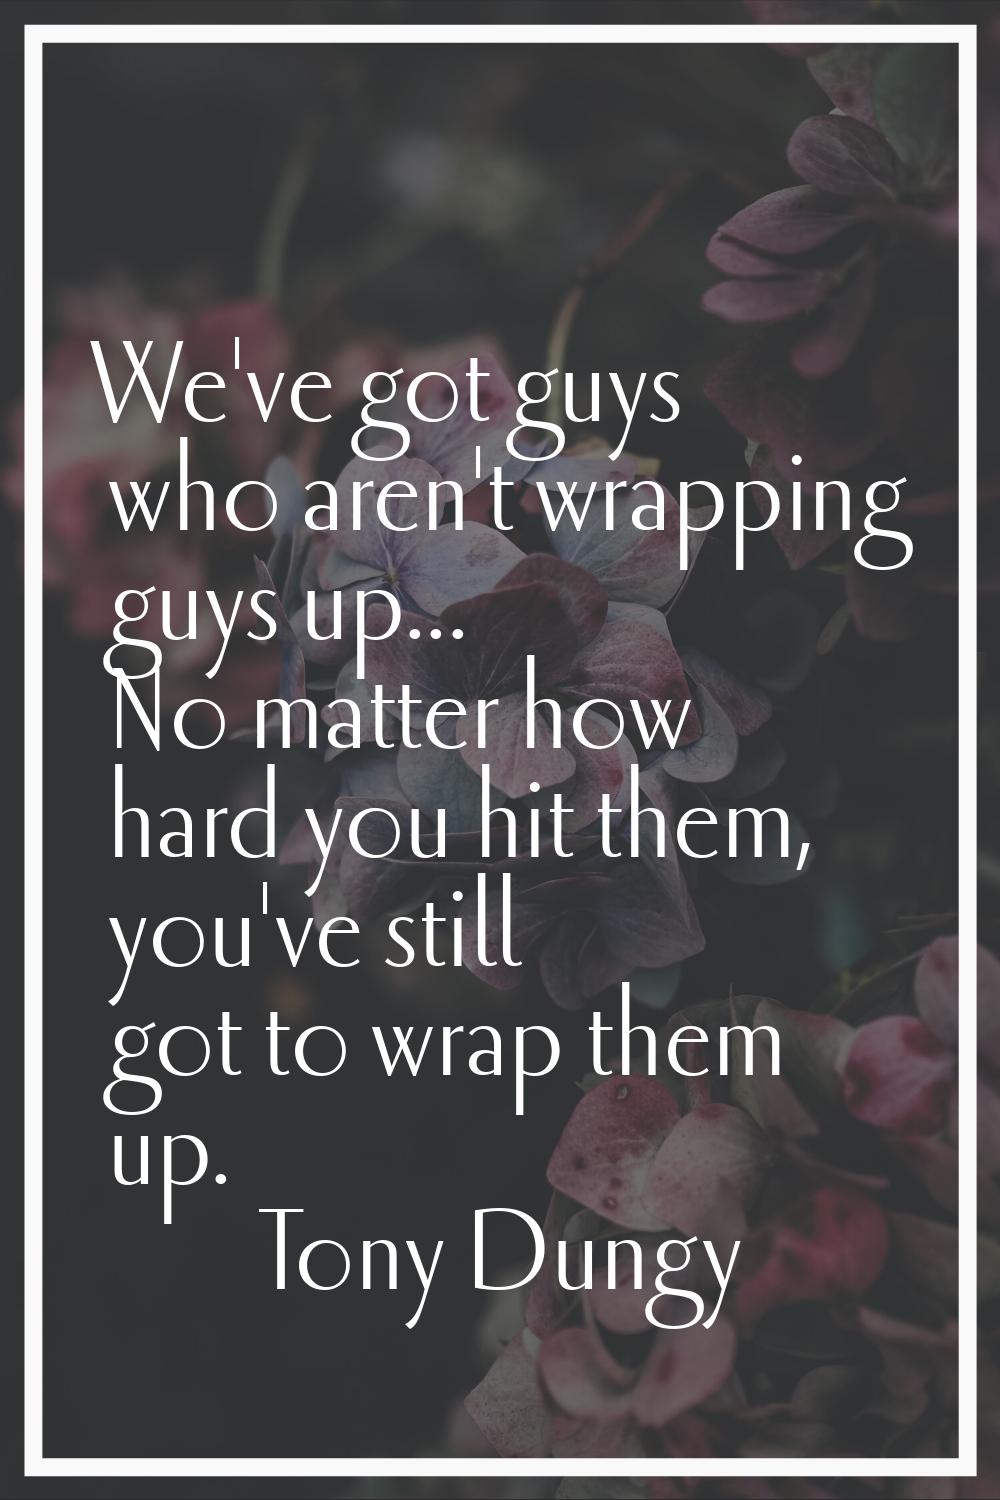 We've got guys who aren't wrapping guys up... No matter how hard you hit them, you've still got to 